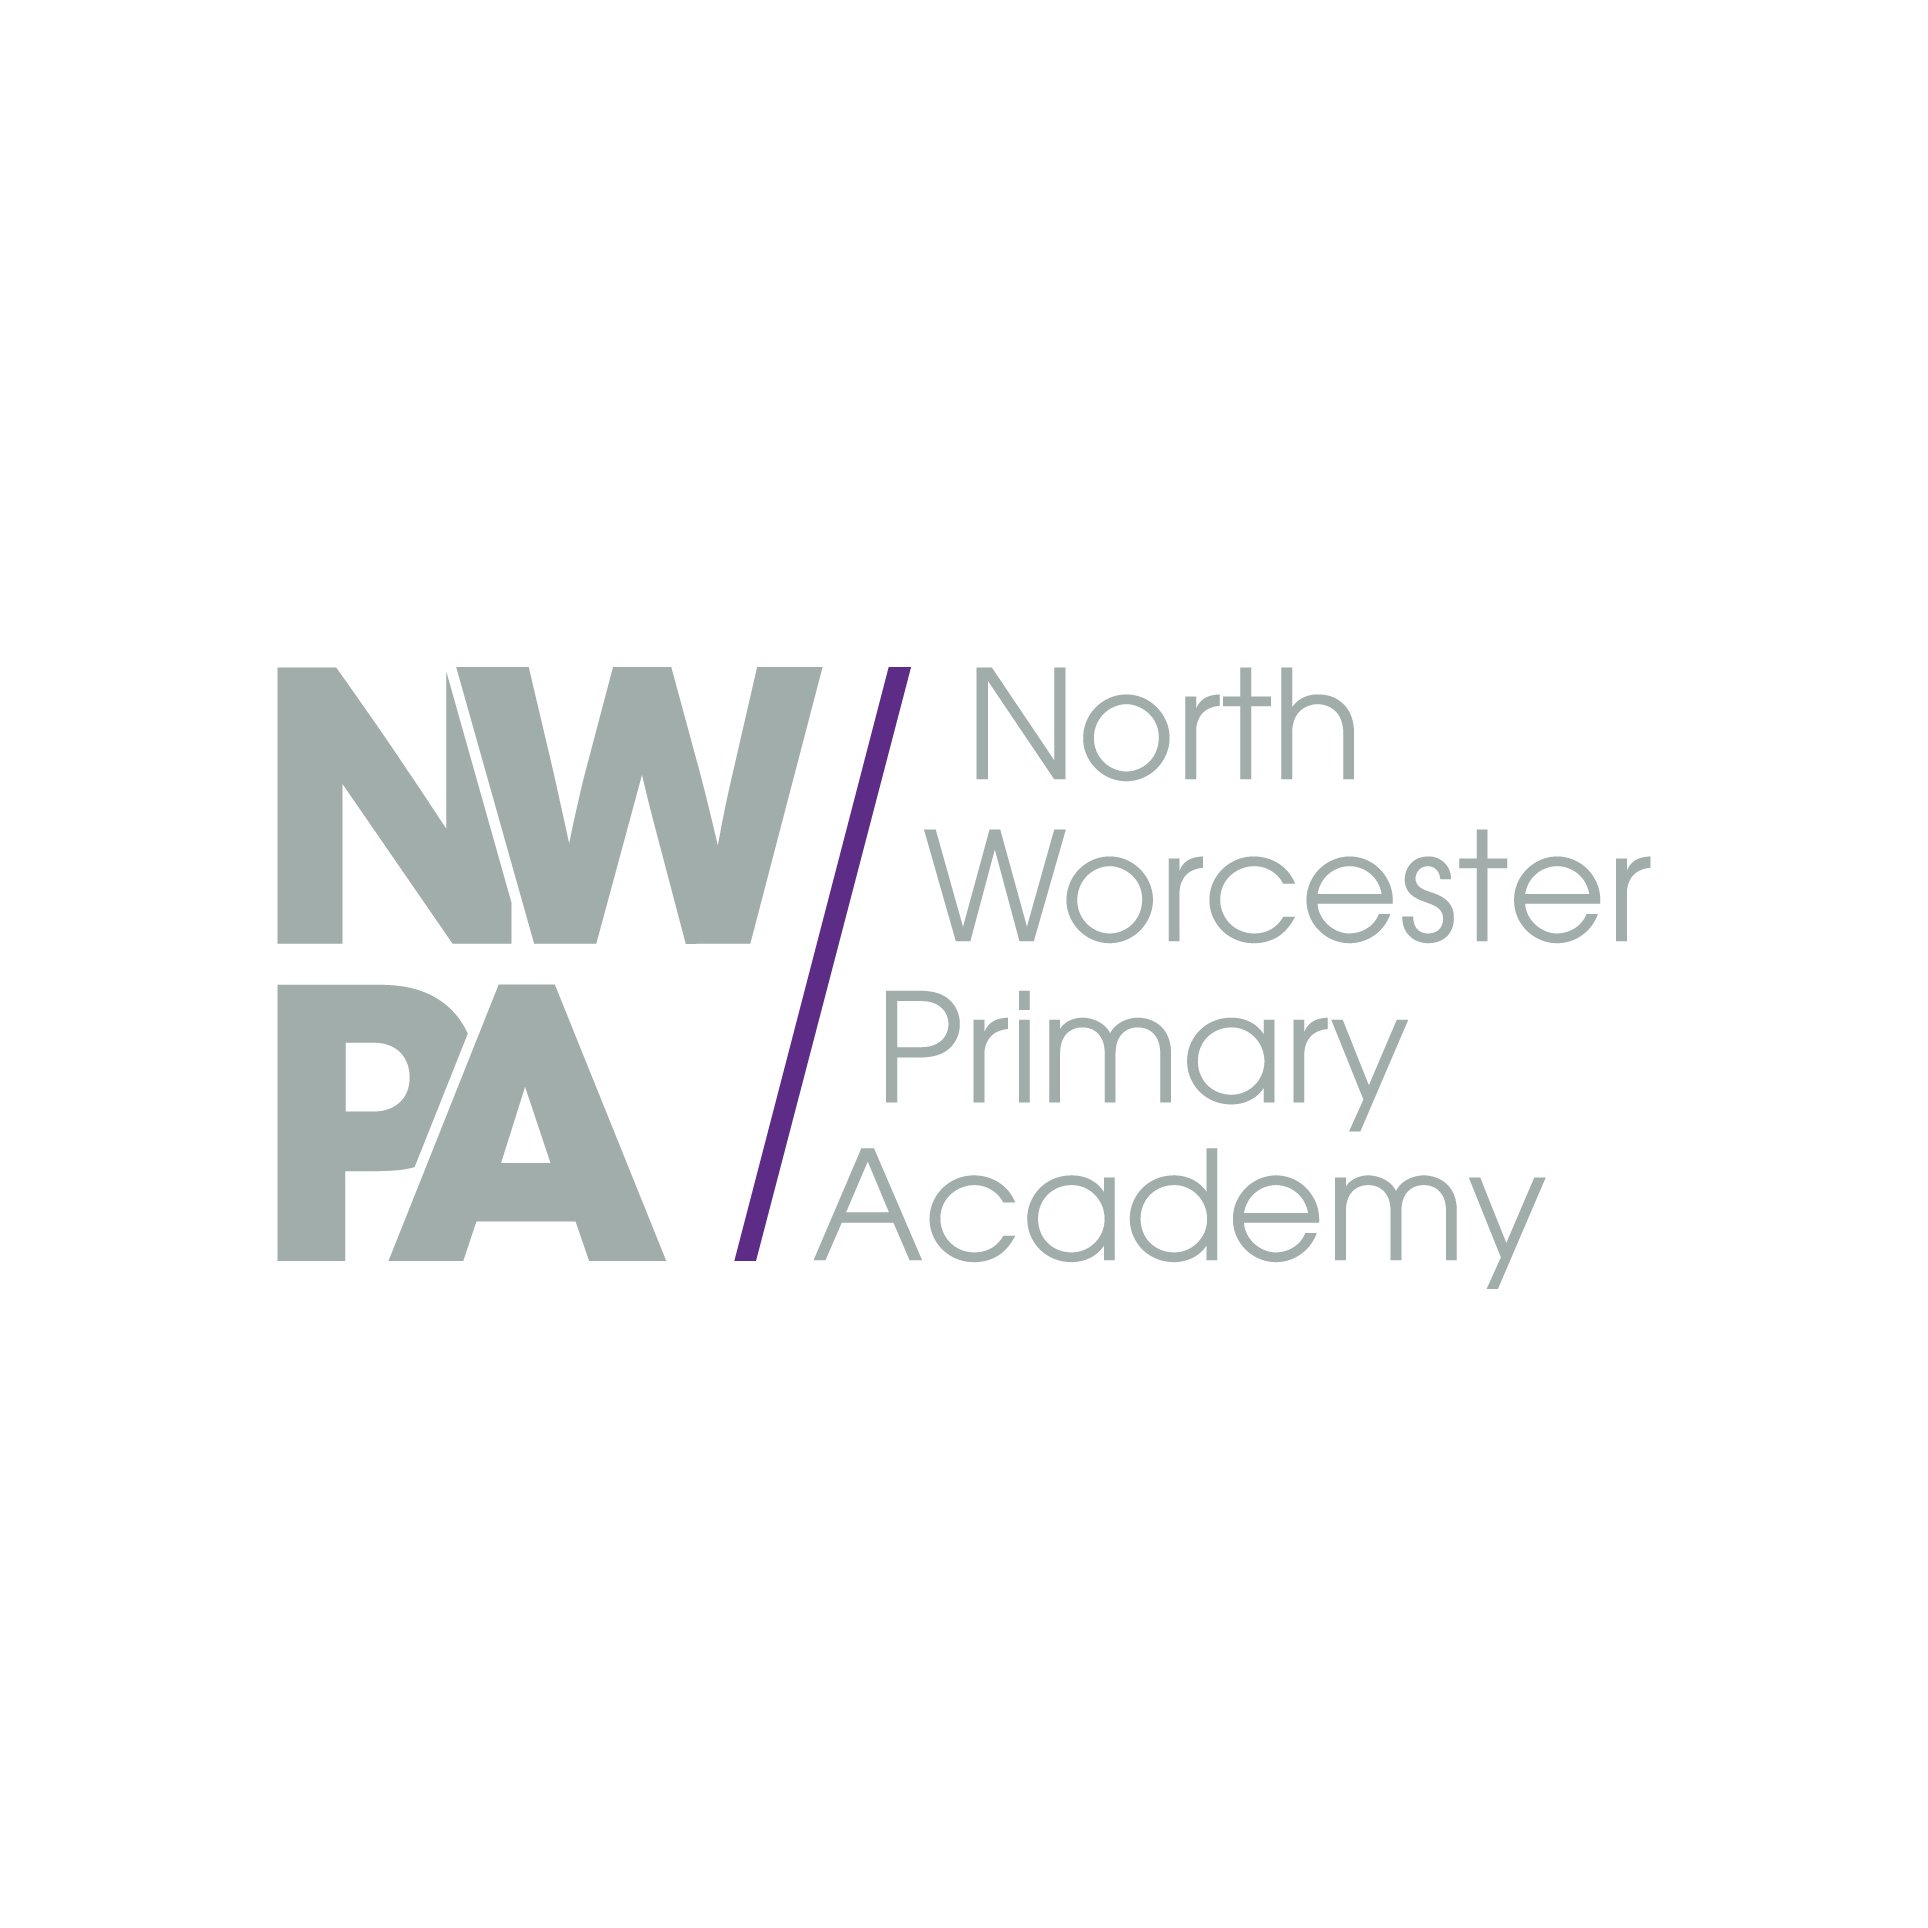 North Worcester Primary Academy is a 'faith ethos' community school which opened its doors inSeptember 2019.